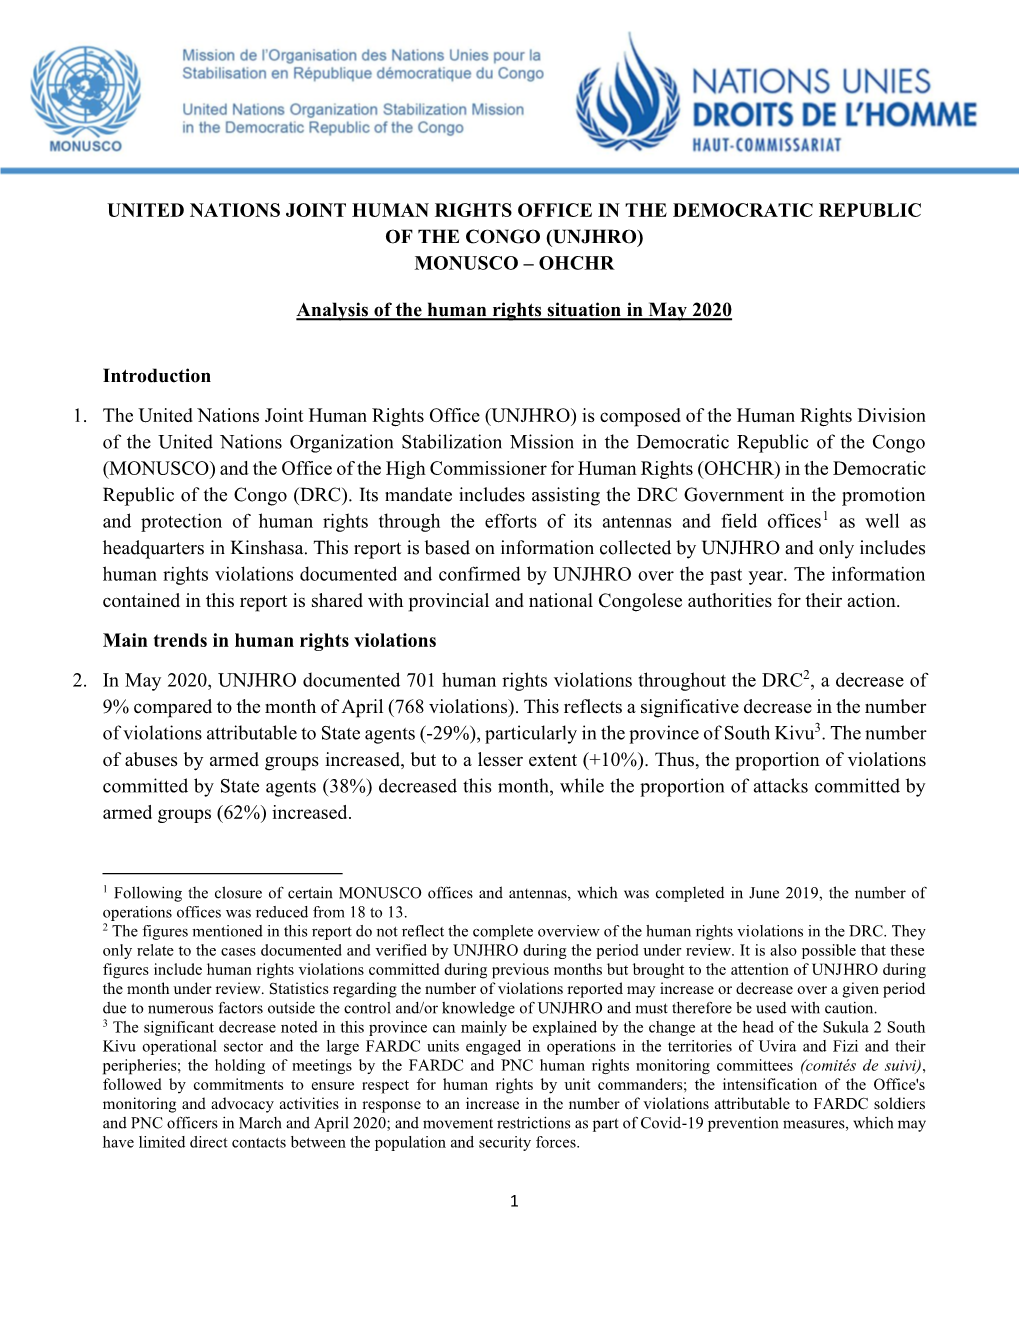 United Nations Joint Human Rights Office in the Democratic Republic of the Congo (Unjhro) Monusco – Ohchr